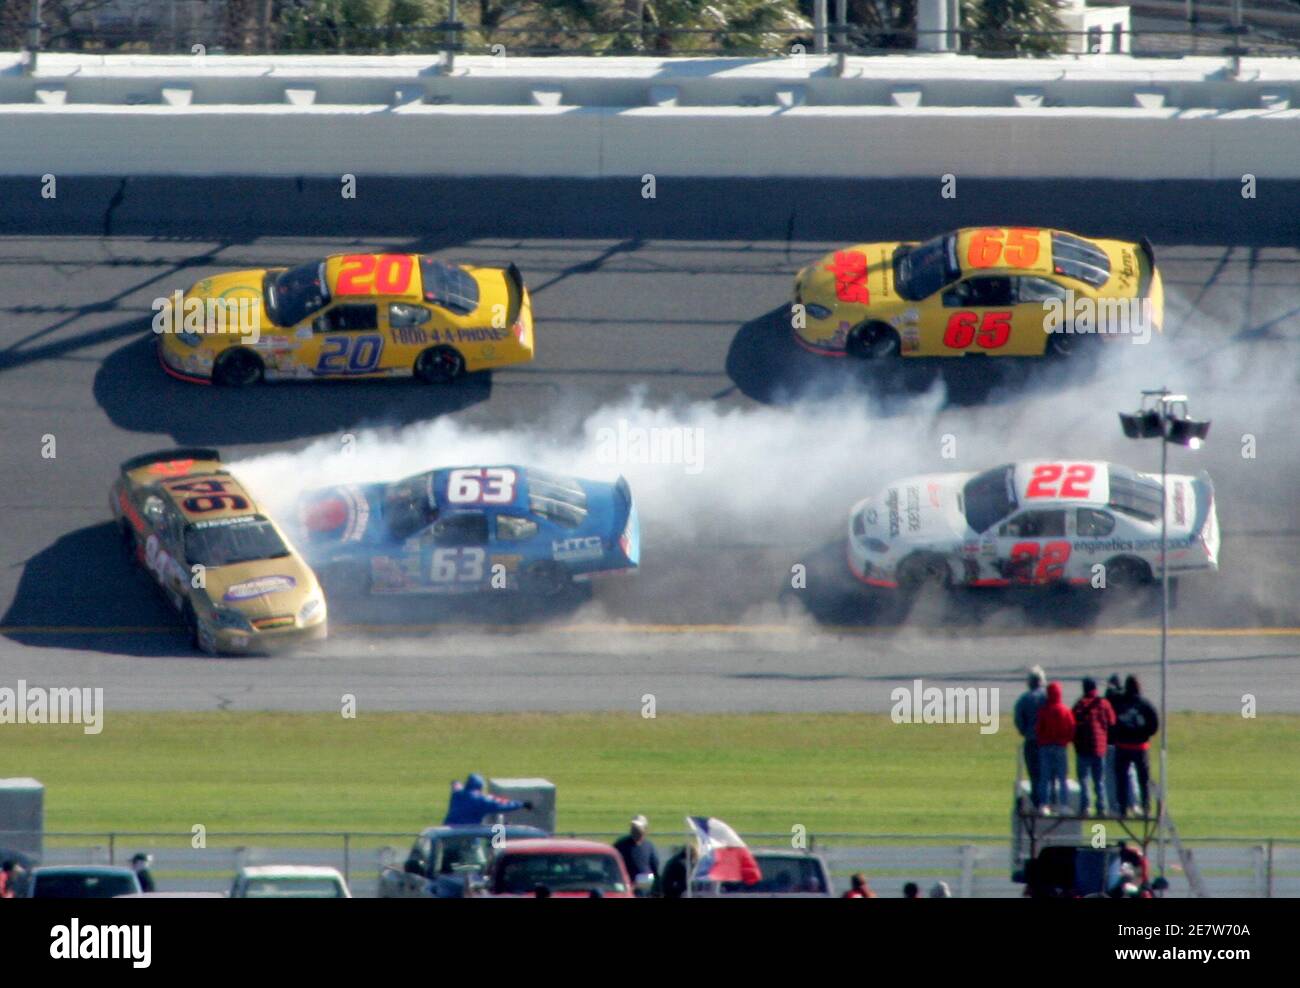 GR Smith in the 94 BGR Research Chevrolet spins and is hit by Dawayne Bryan in the 63 Hi-Tech Construction Dodge in between turns three and four during the running of the ARCA 200 at the Daytona International Speedway in Daytona Beach, Florida February 12, 2006. REUTERS/Rick Fowler Stock Photo